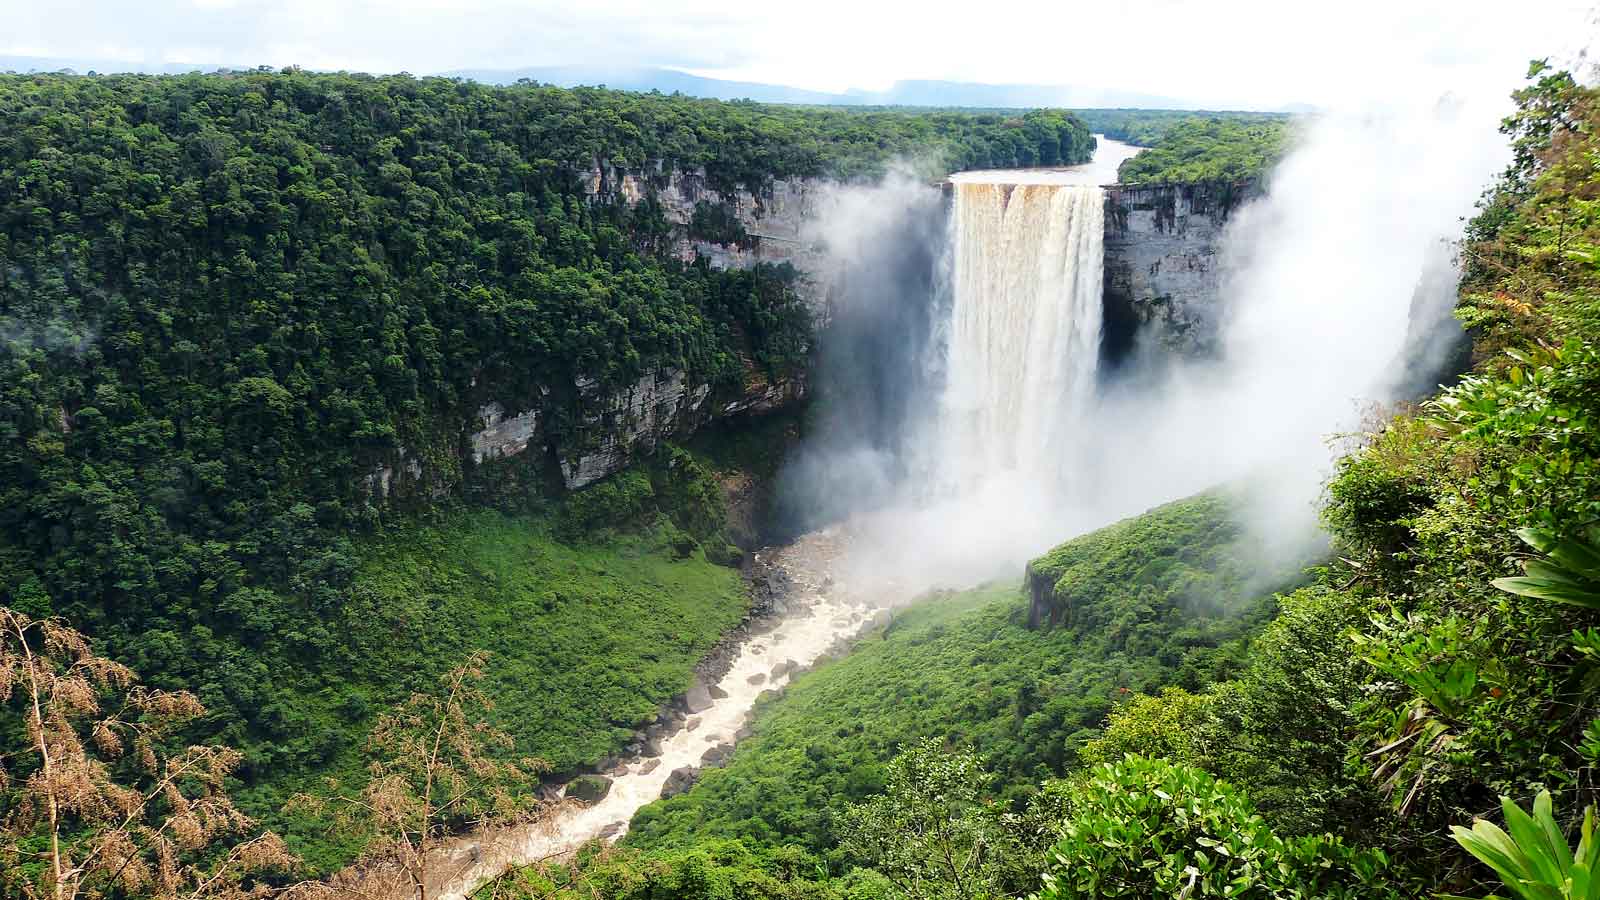 <p><span>Reaching Kaieteur Falls, hidden deep in Guyana’s Amazon rainforest, requires significant effort, but seeing the world’s highest single-drop waterfall at 741 feet is worth it. </span></p><p><span>Regular flights on small planes from Georgetown provide access. It’s a 15-minute walk from the airstrip to the top of the falls, though the best views are often seen from the flight in and out.</span></p>